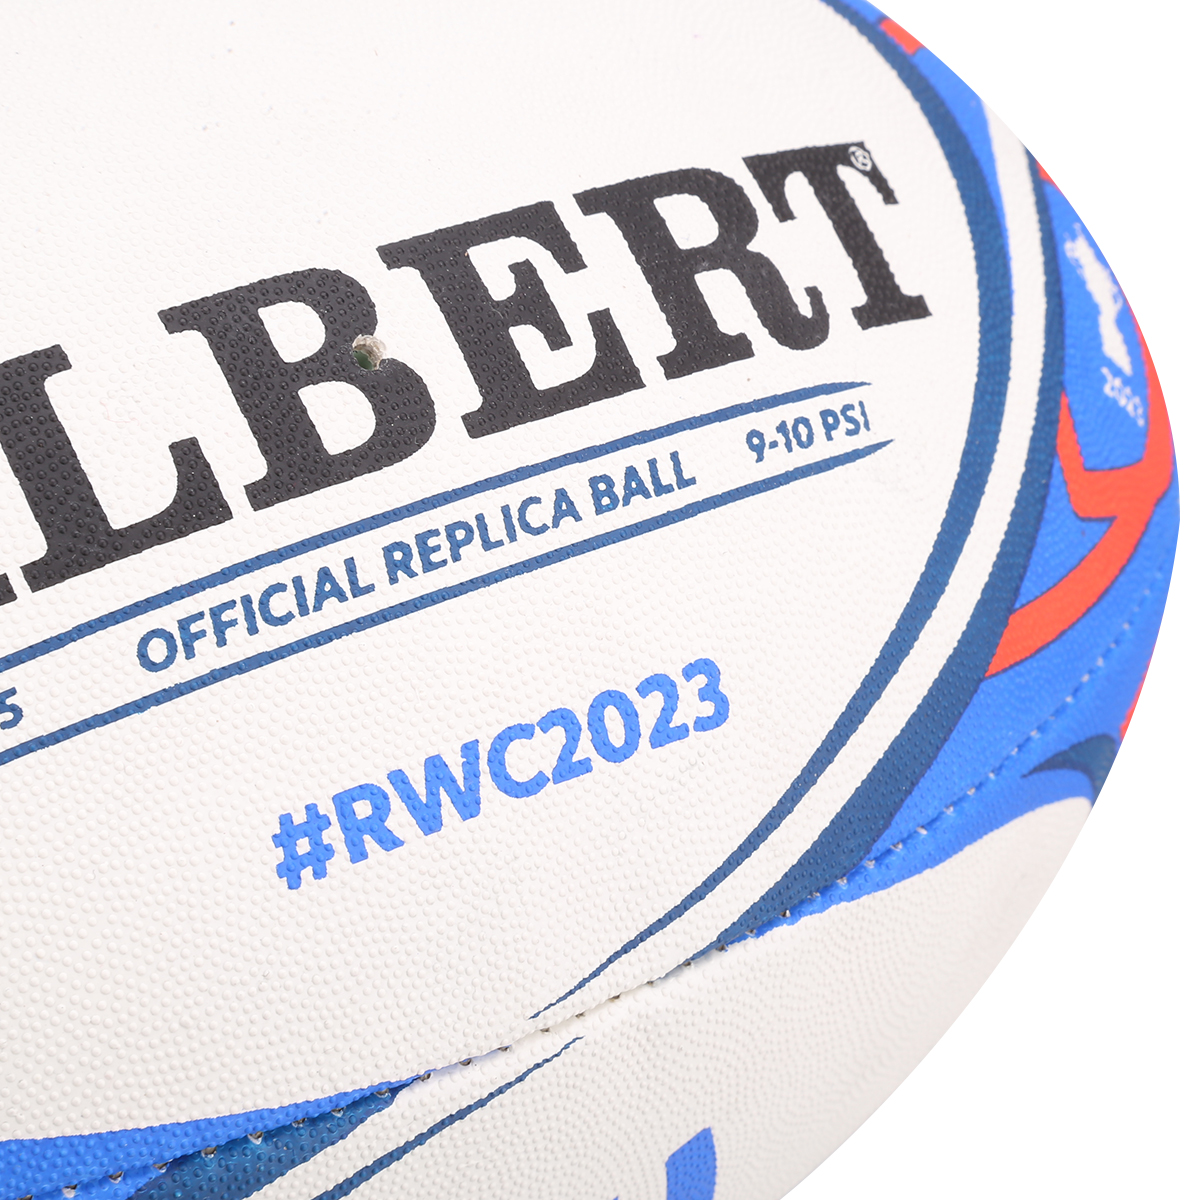 Pelota Gilbert Rugby Rwc2023,  image number null